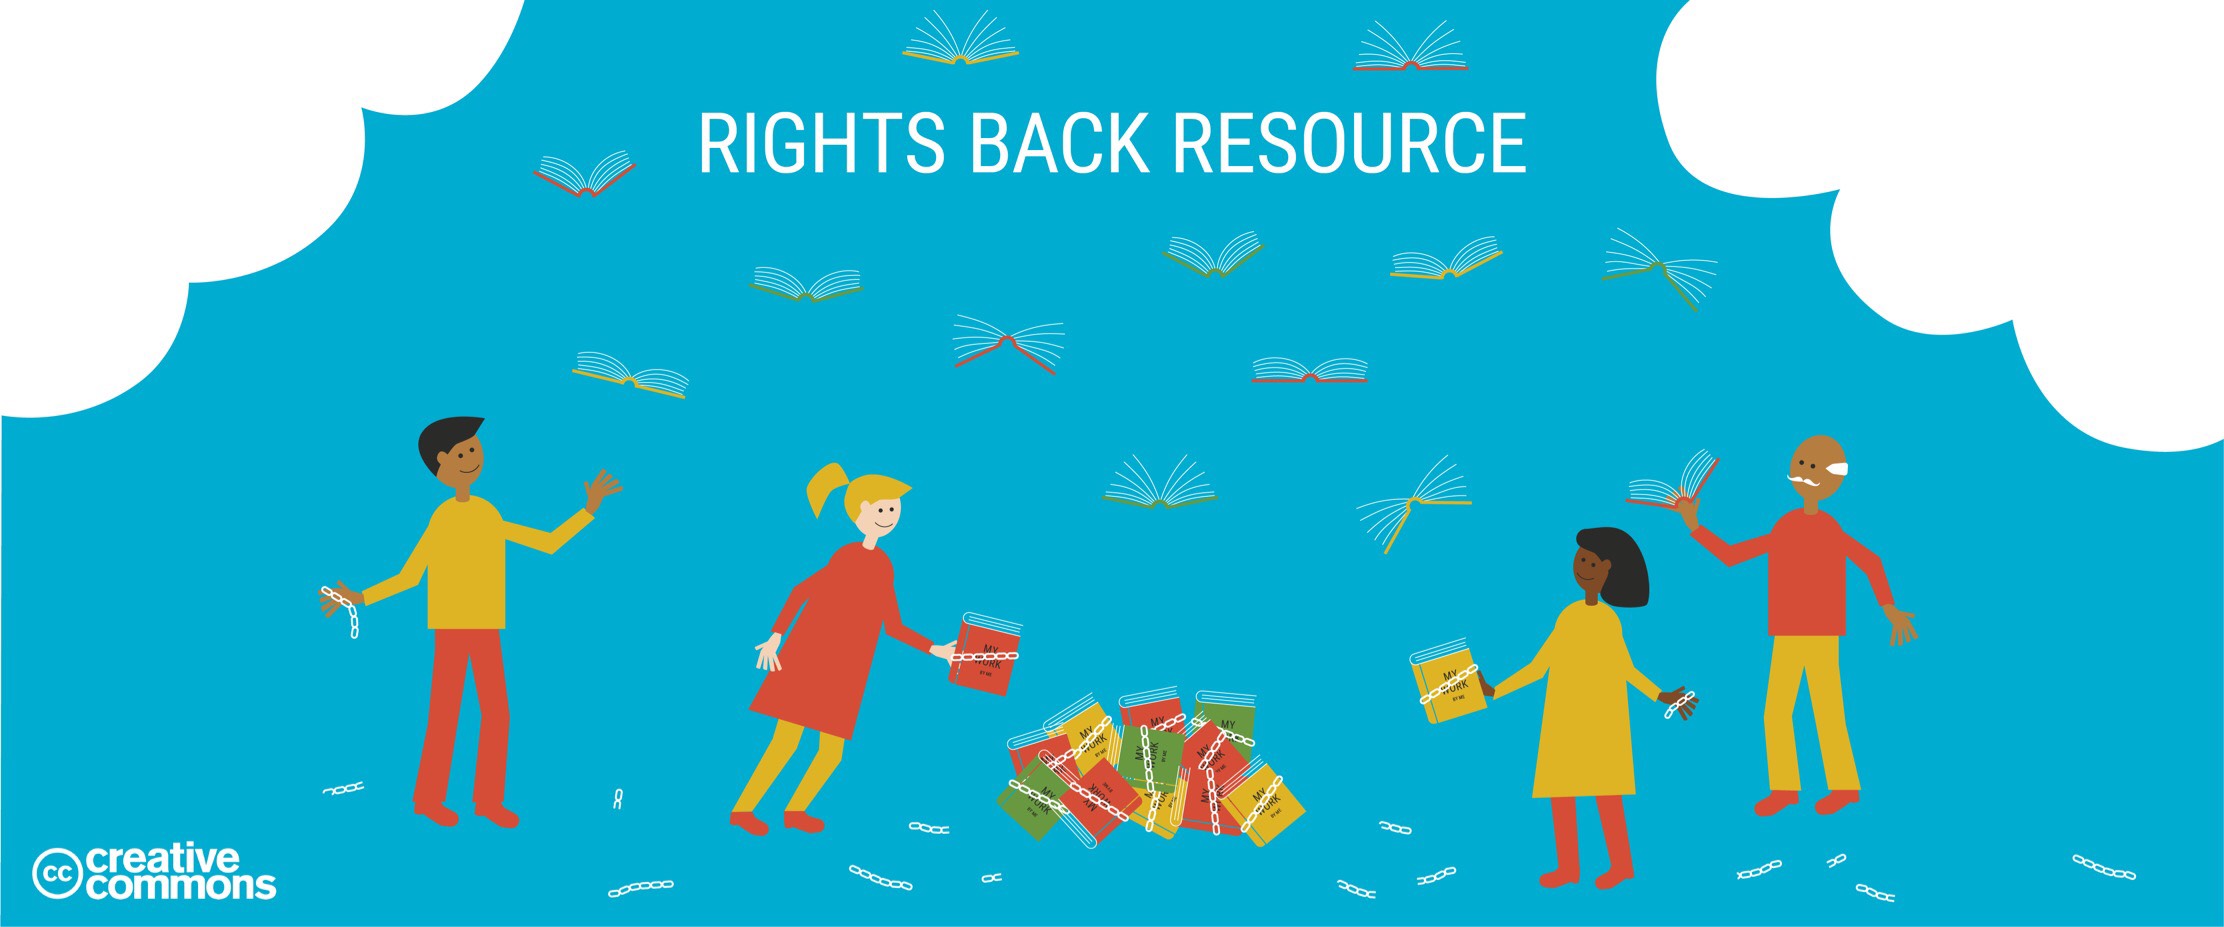 rights-back-resource